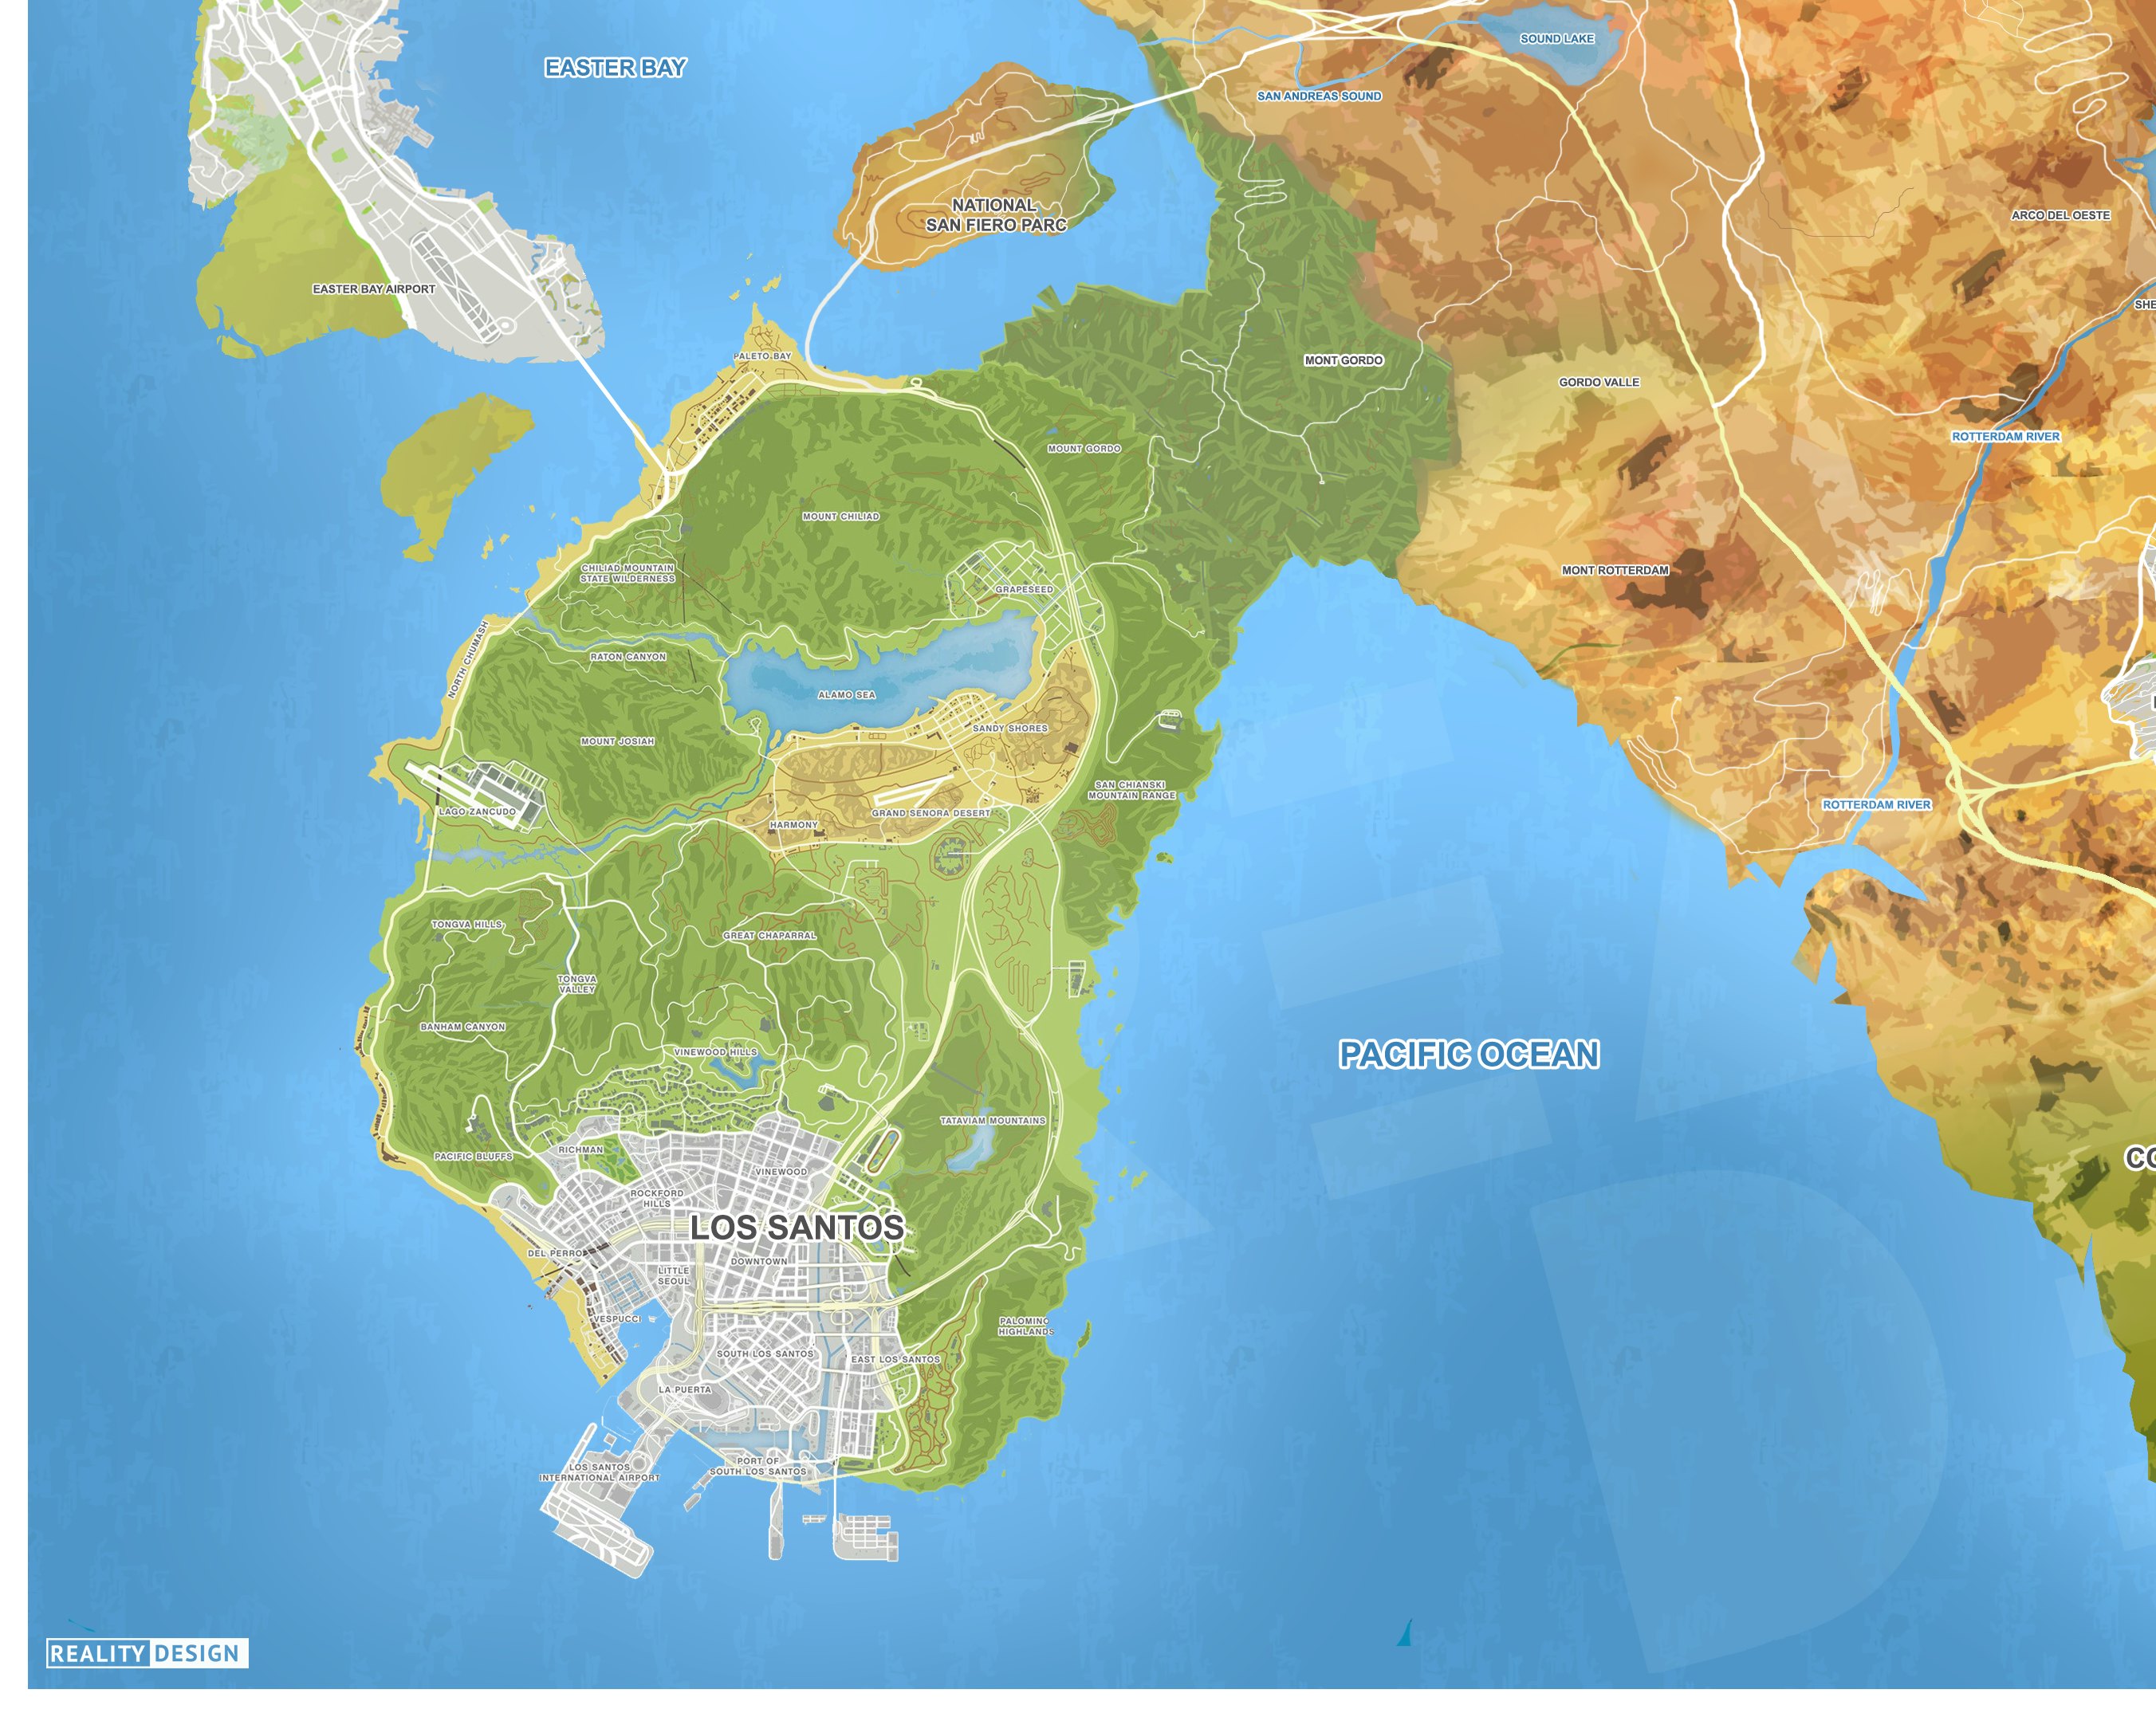 Gta 6 Map / While fans are getting more anxious for a new game